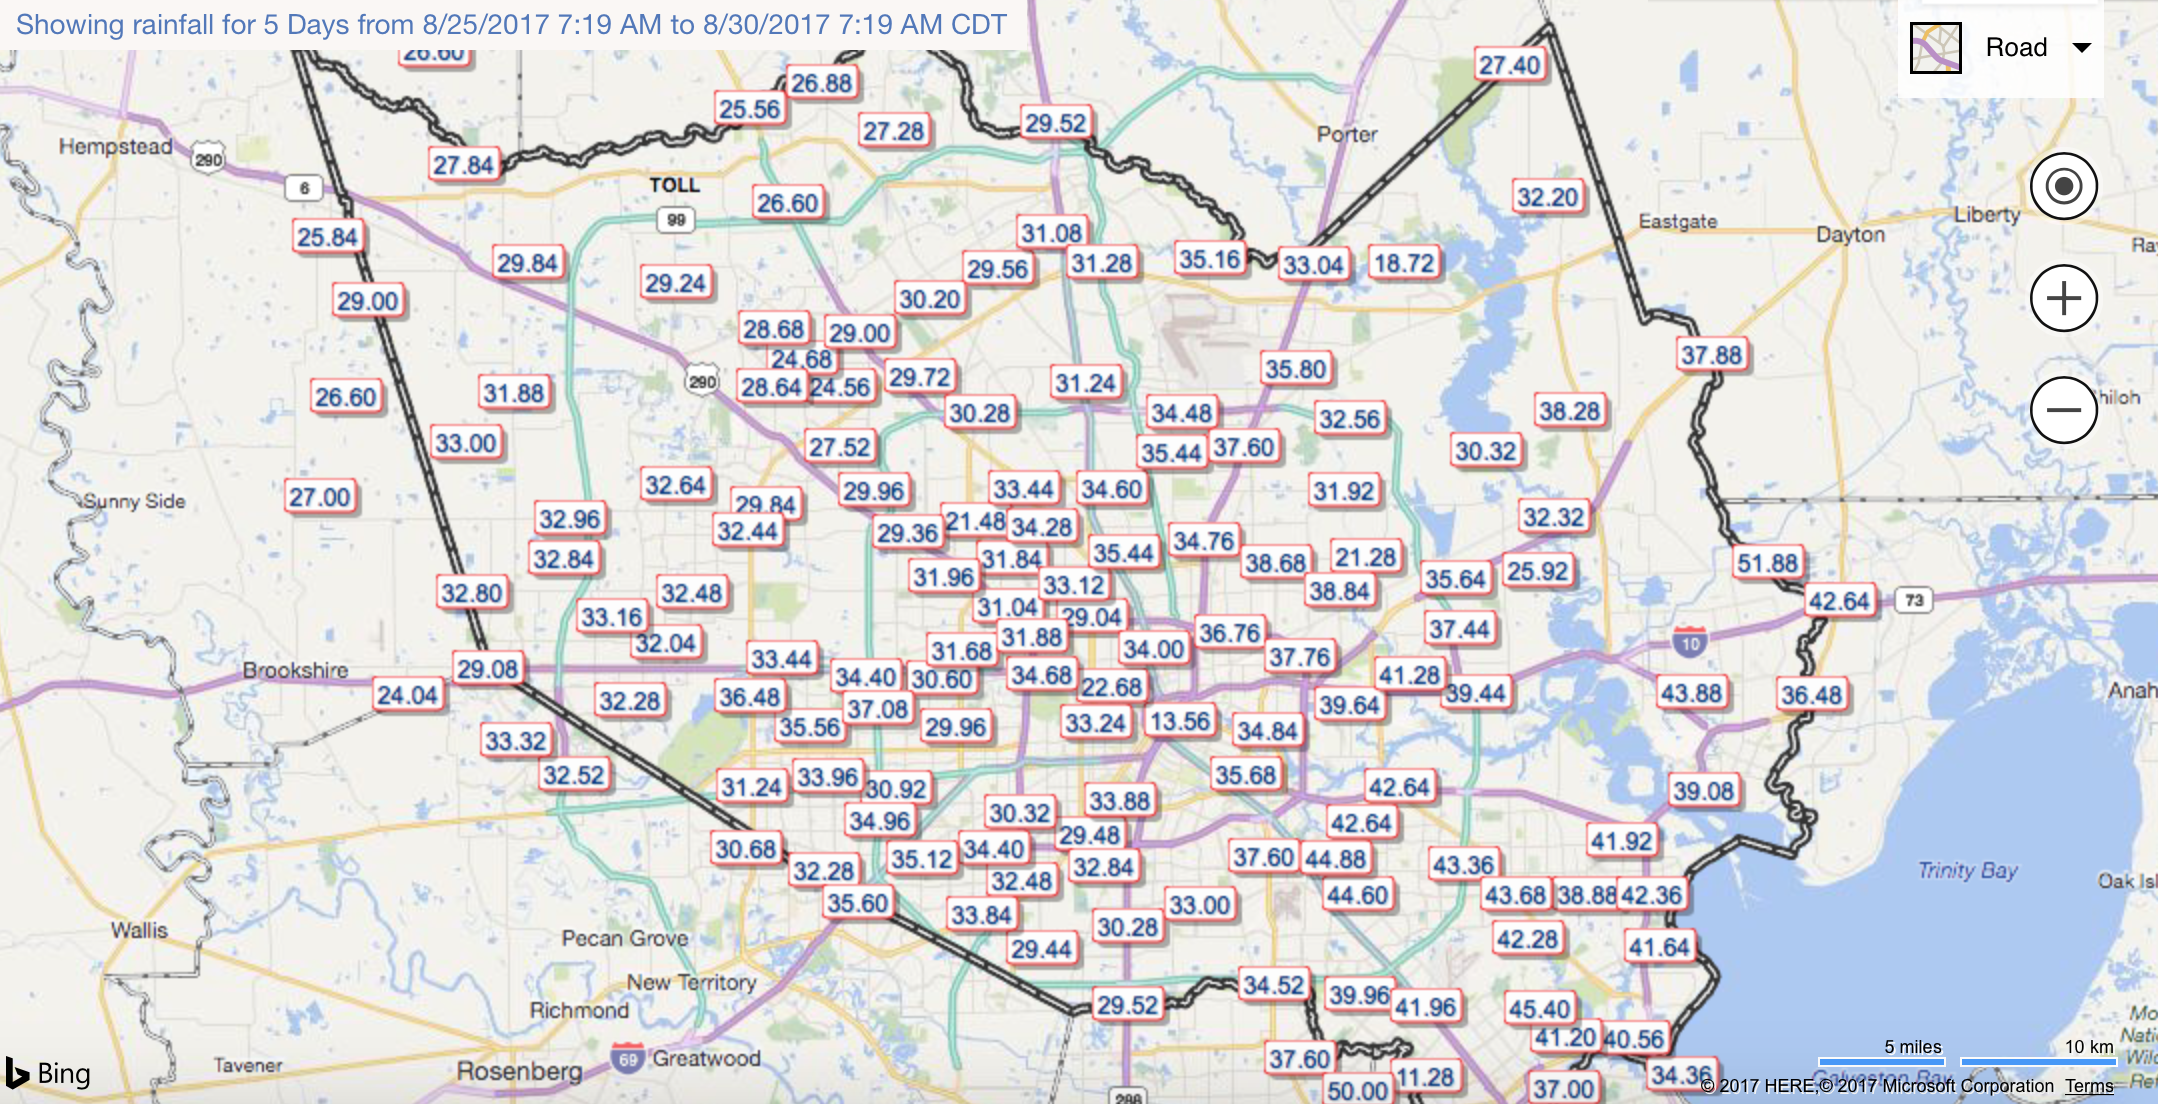 Rainfall totals for the Houston area during Hurricane Harvey